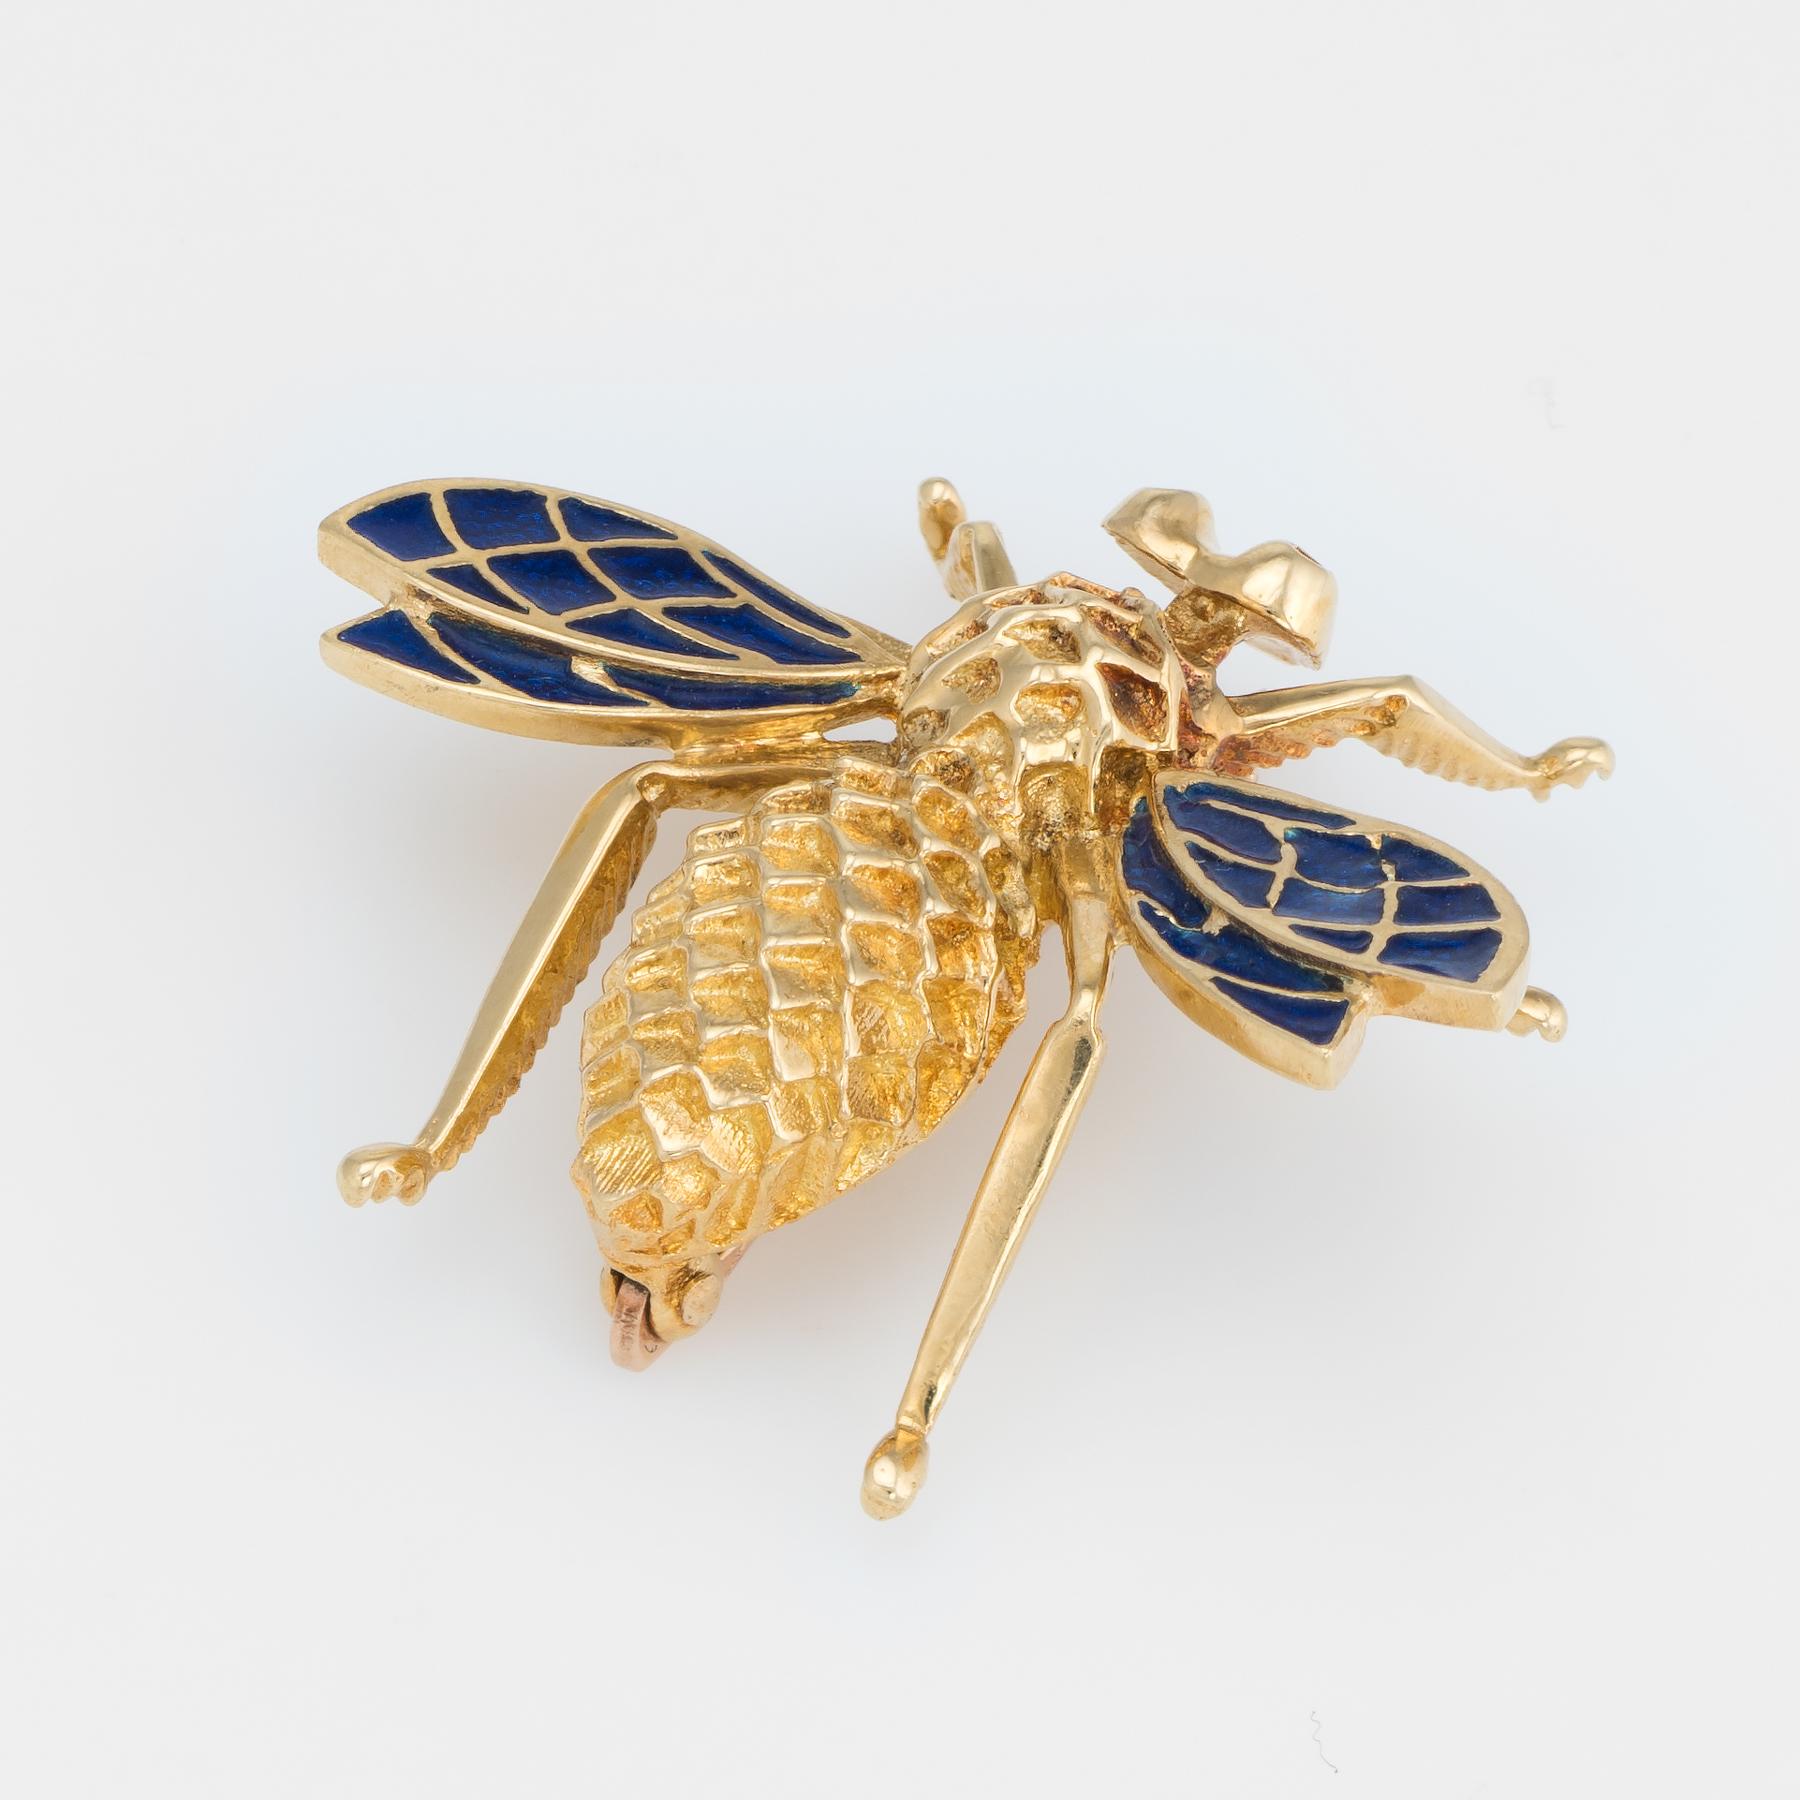 Finely detailed vintage brooch, crafted in 14 karat yellow gold. 

Blue enamel is set into the bees wings adding color and contrast to the piece. The body of the bee features a graduated honeycomb like texture.  

The brooch is in excellent original